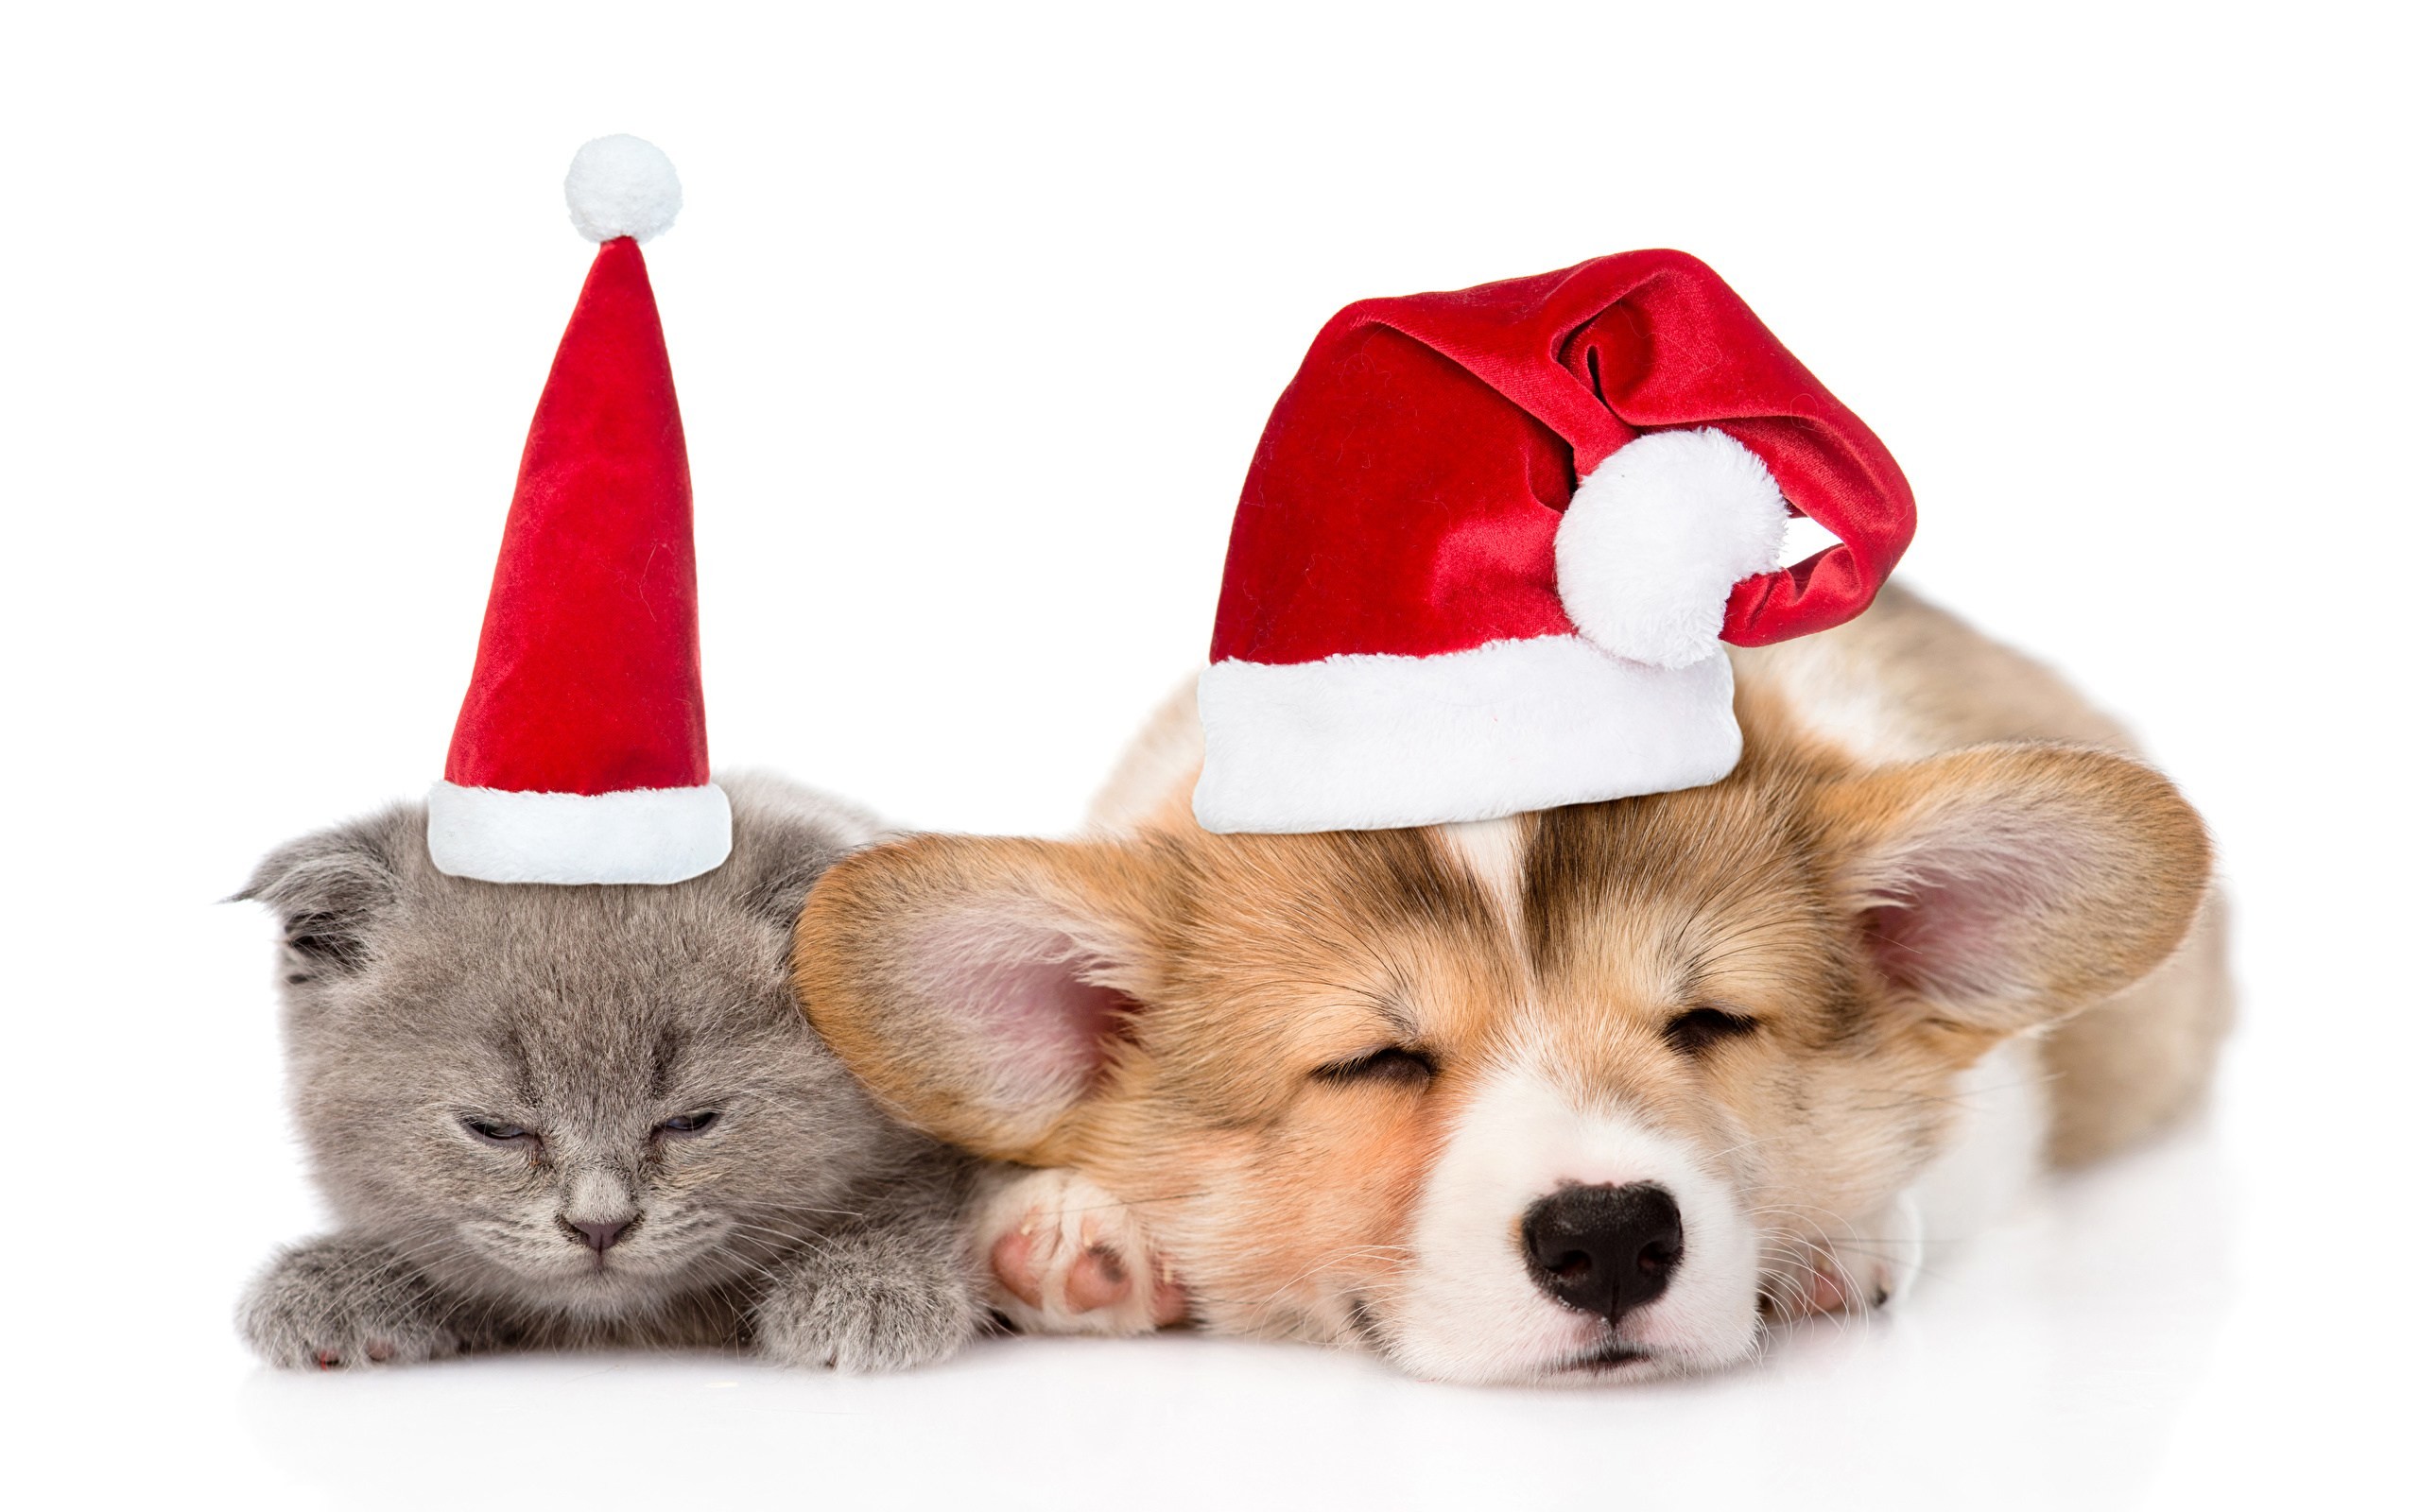 2560x1600 Photo Puppy Kittens Welsh Corgi Dogs Cats New Year 2 Sleep   Christmas Puppies And Wallpaper